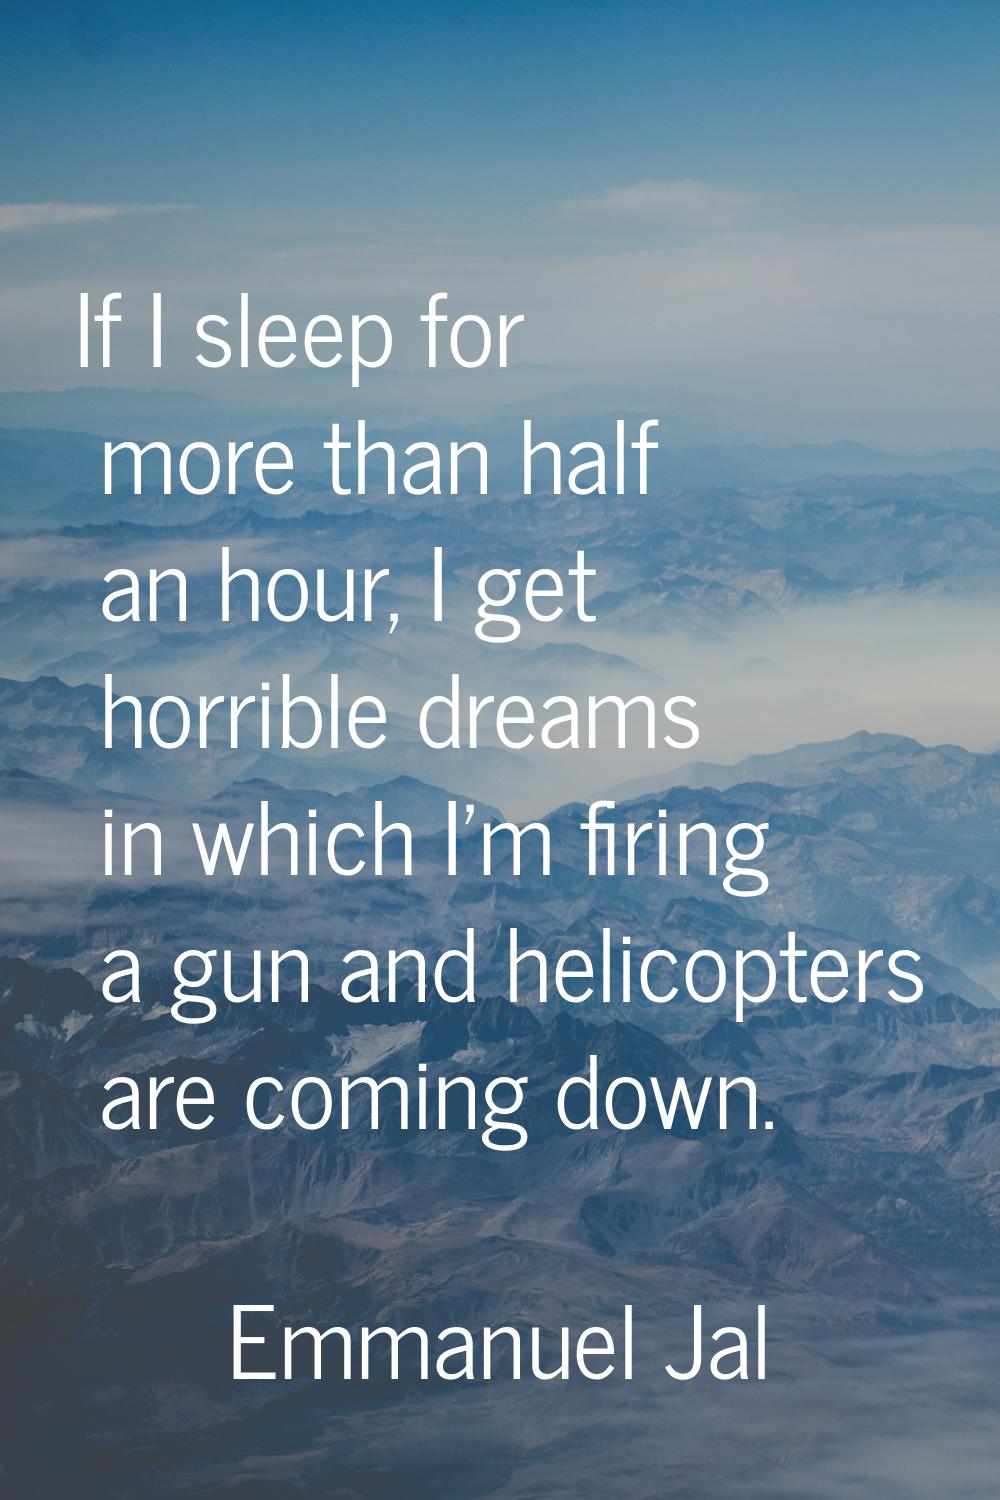 If I sleep for more than half an hour, I get horrible dreams in which I'm firing a gun and helicopt